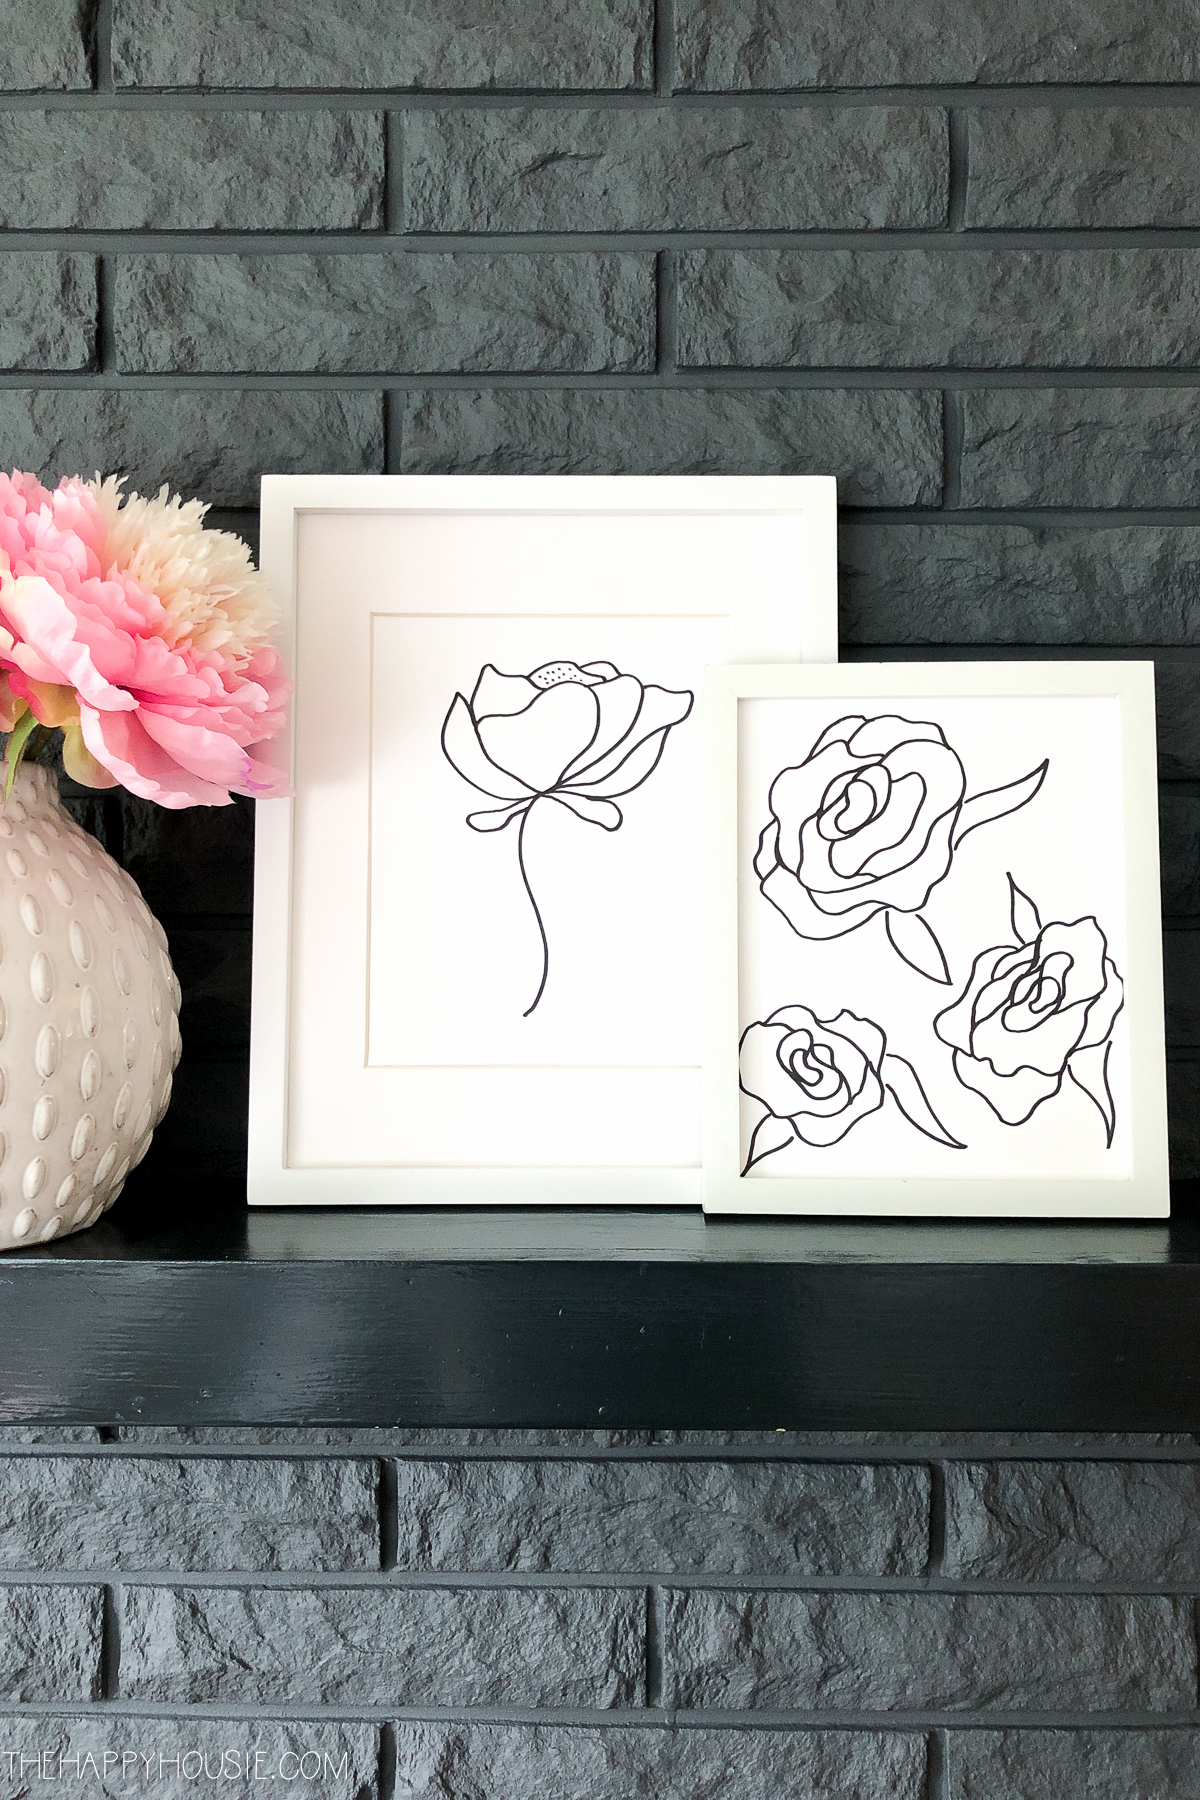 A white vase with a pink and white peony sitting beside the drawings.